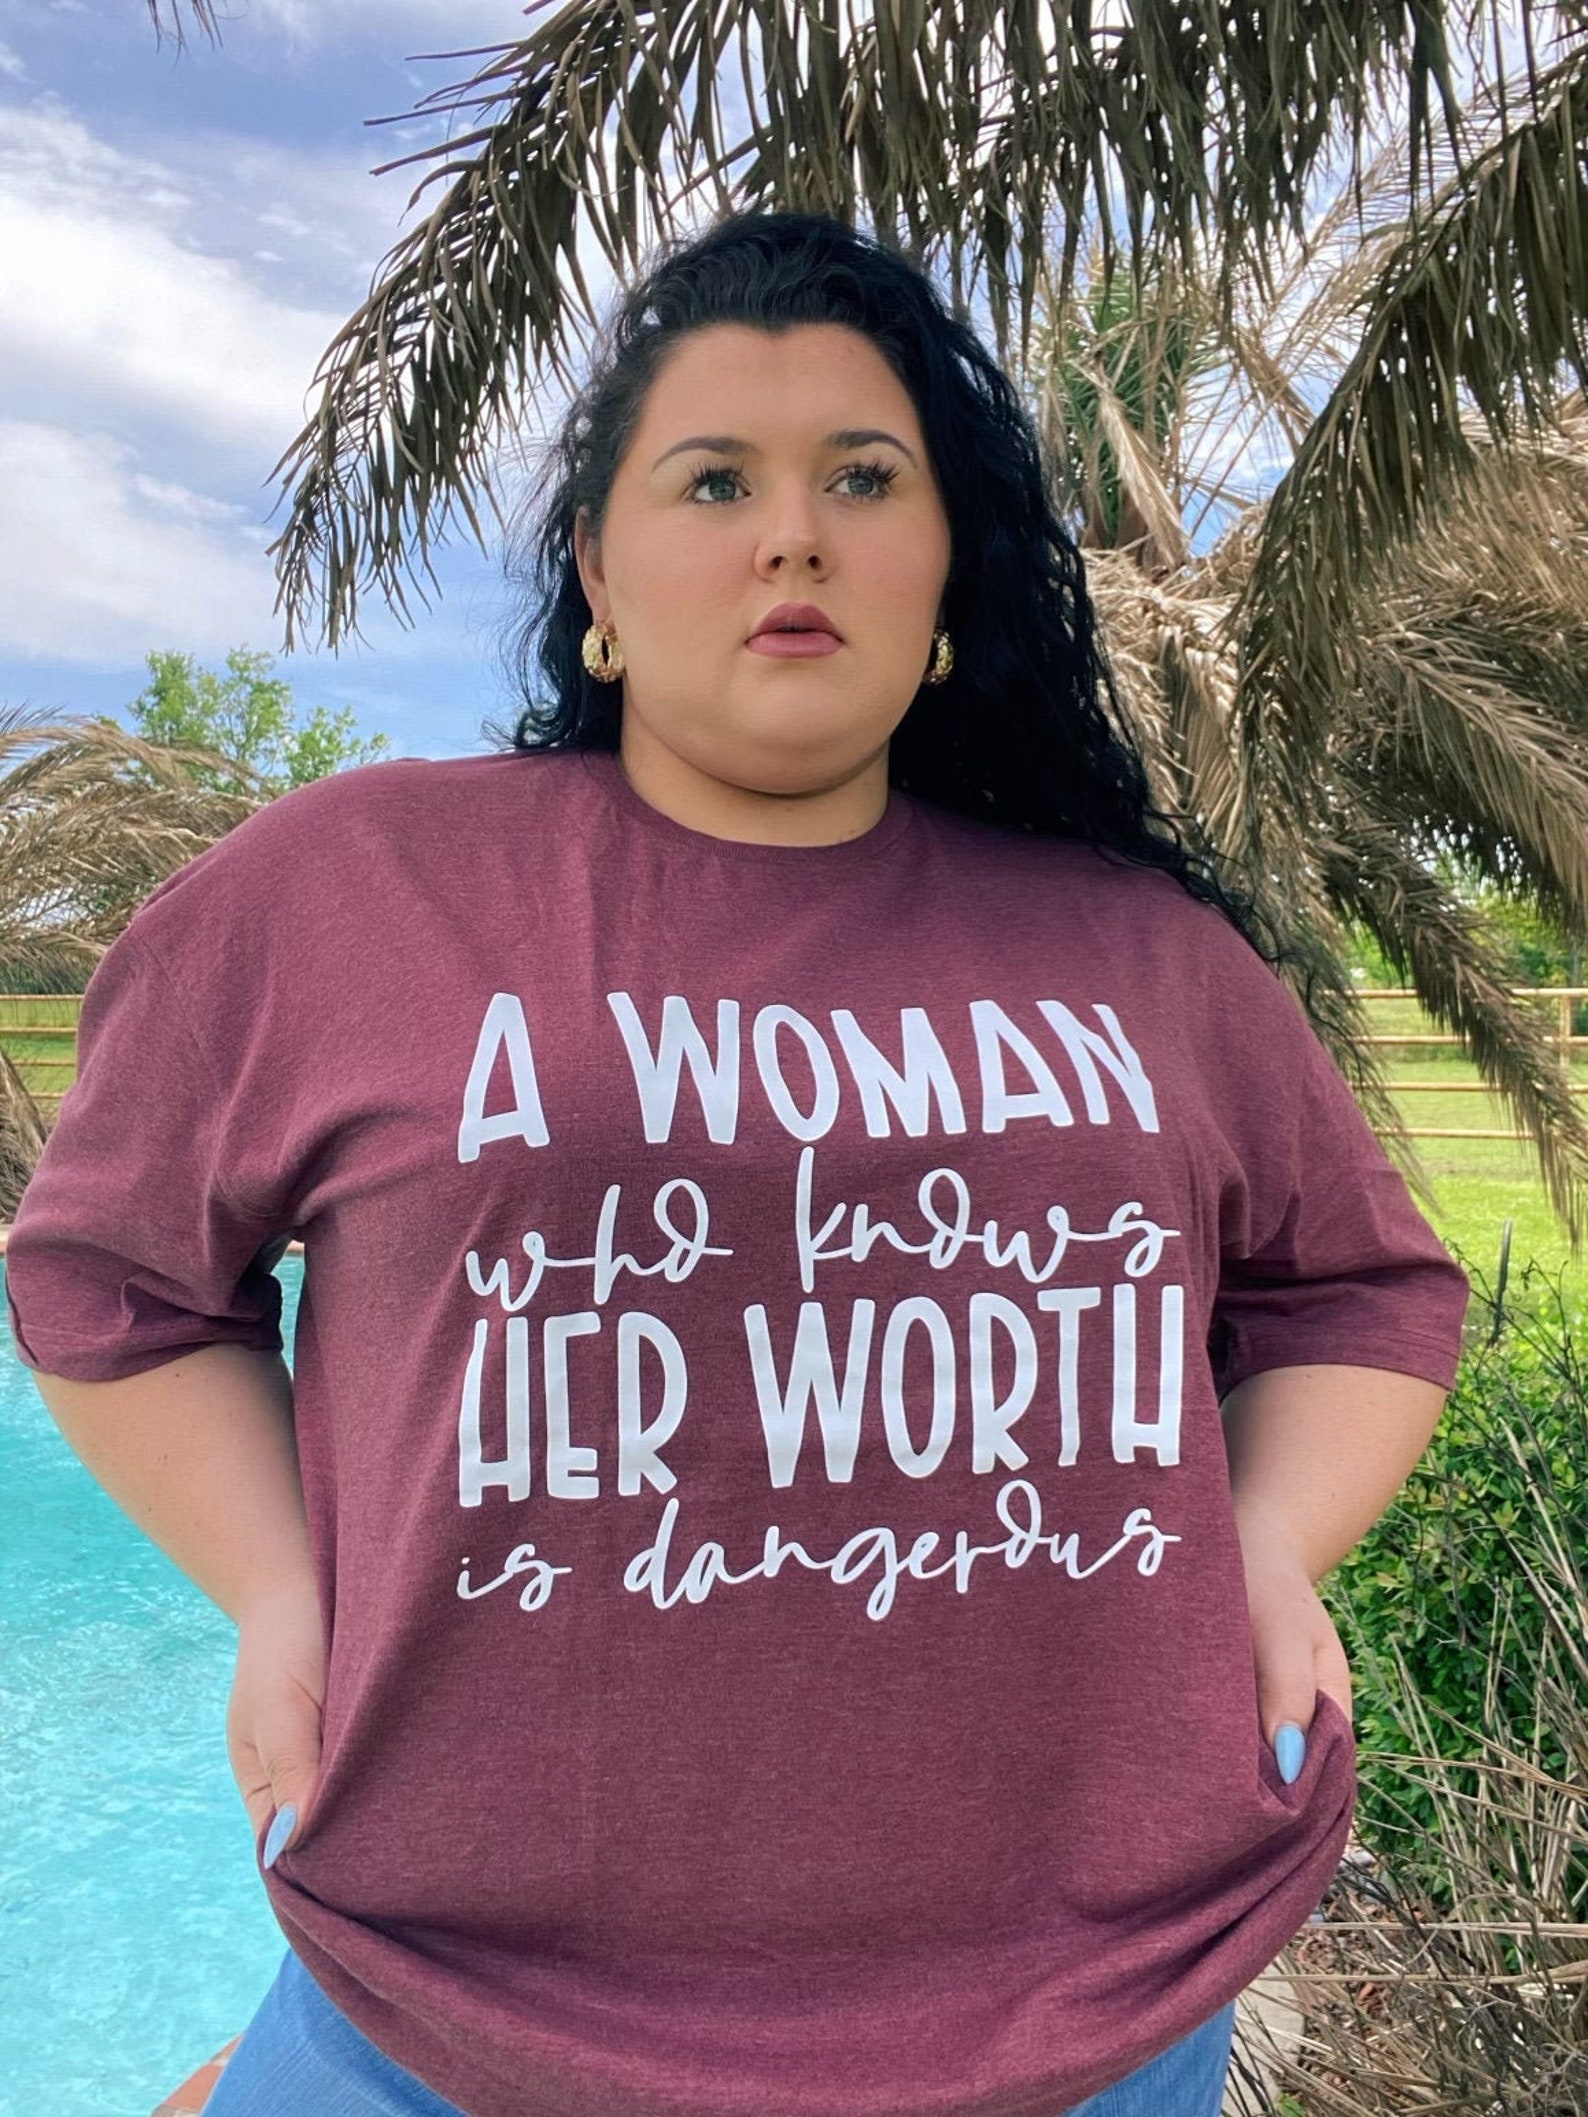 A woman who knows her worth is dangerous self worth | Etsy